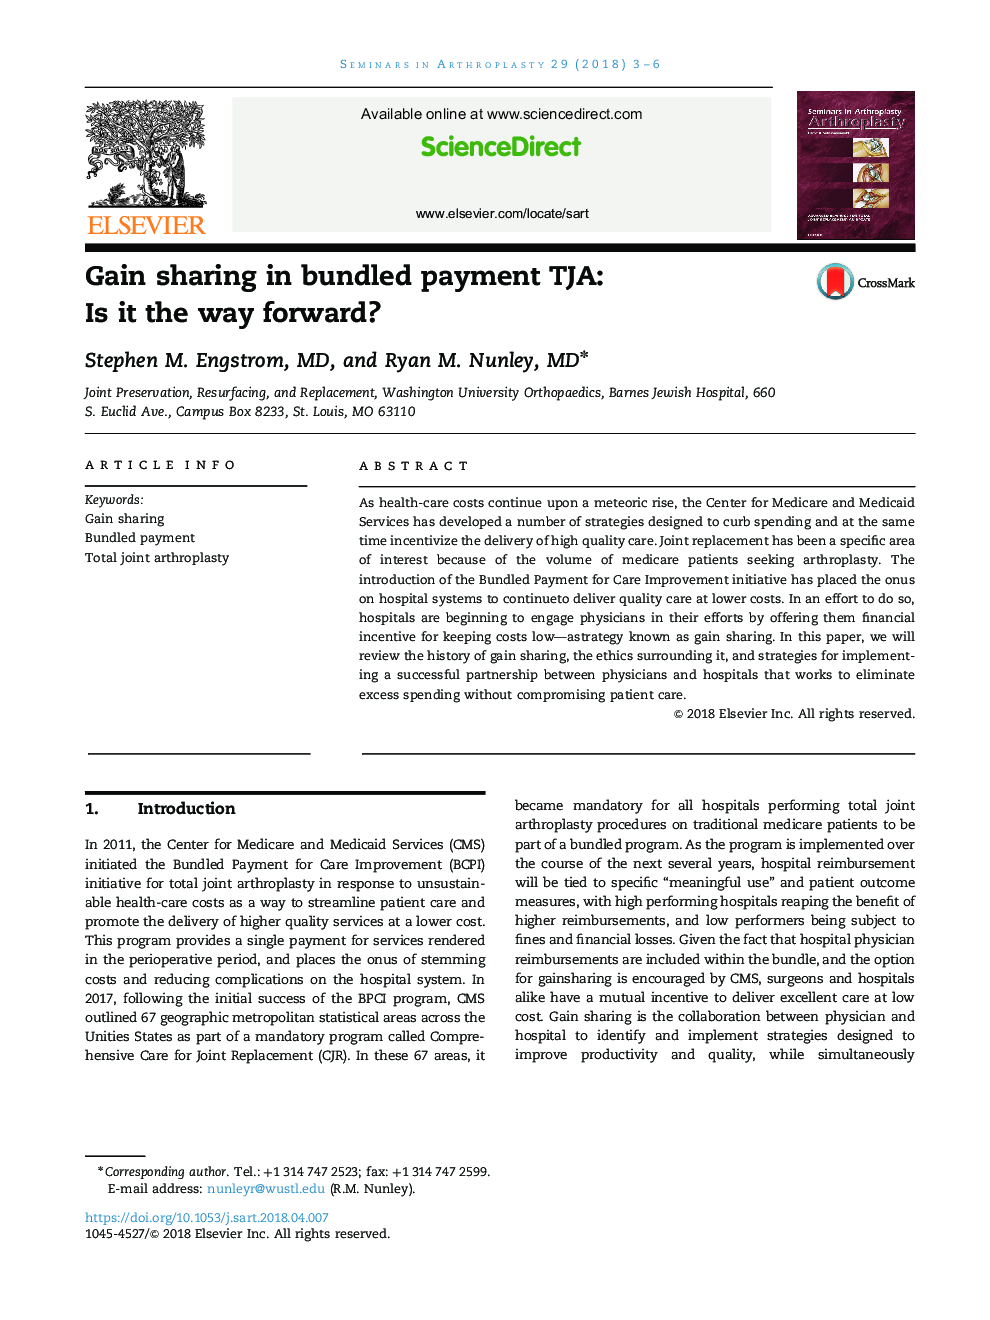 Gain sharing in bundled payment TJA: Is it the way forward?